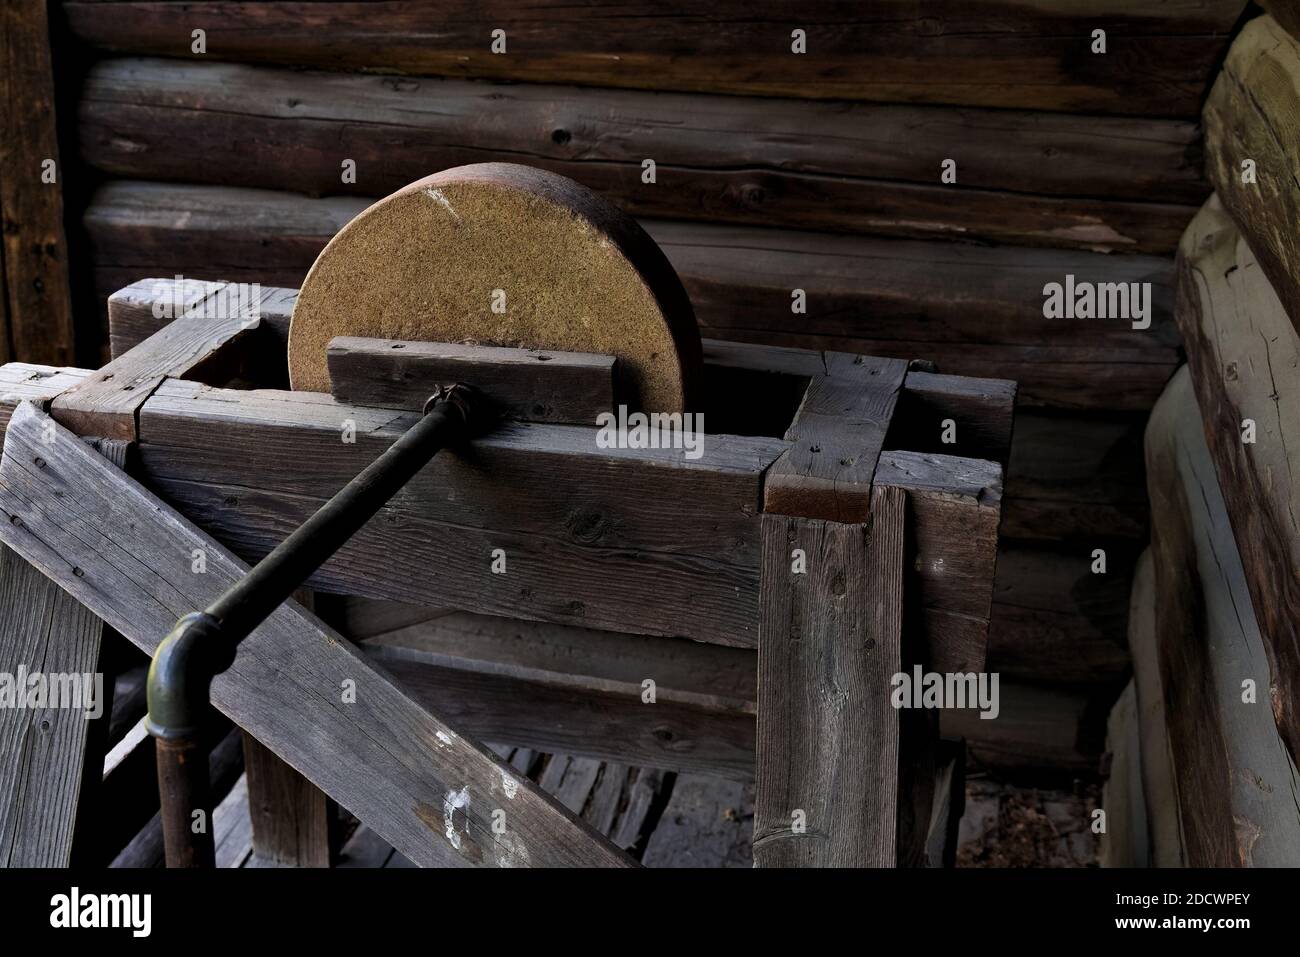 Antique grinding stone in wood, iron and rock, made for sharpening knives and other metal tools. Stock Photo